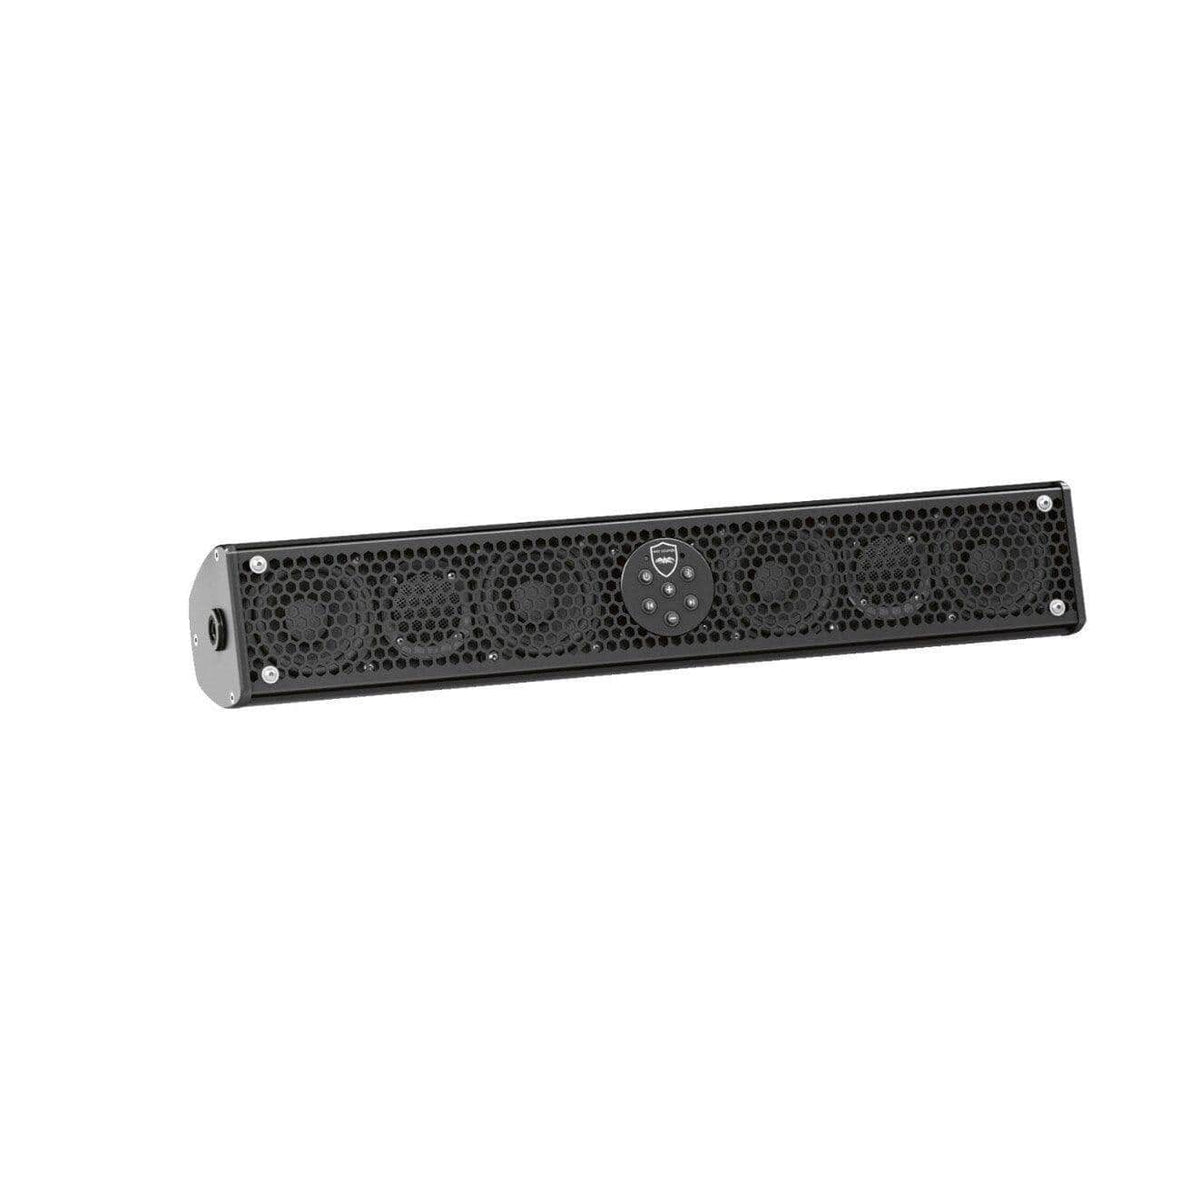 Wet Sounds Stealth 6 Ultra HD Can-Am Edition Sound Bar - Factory Recreation